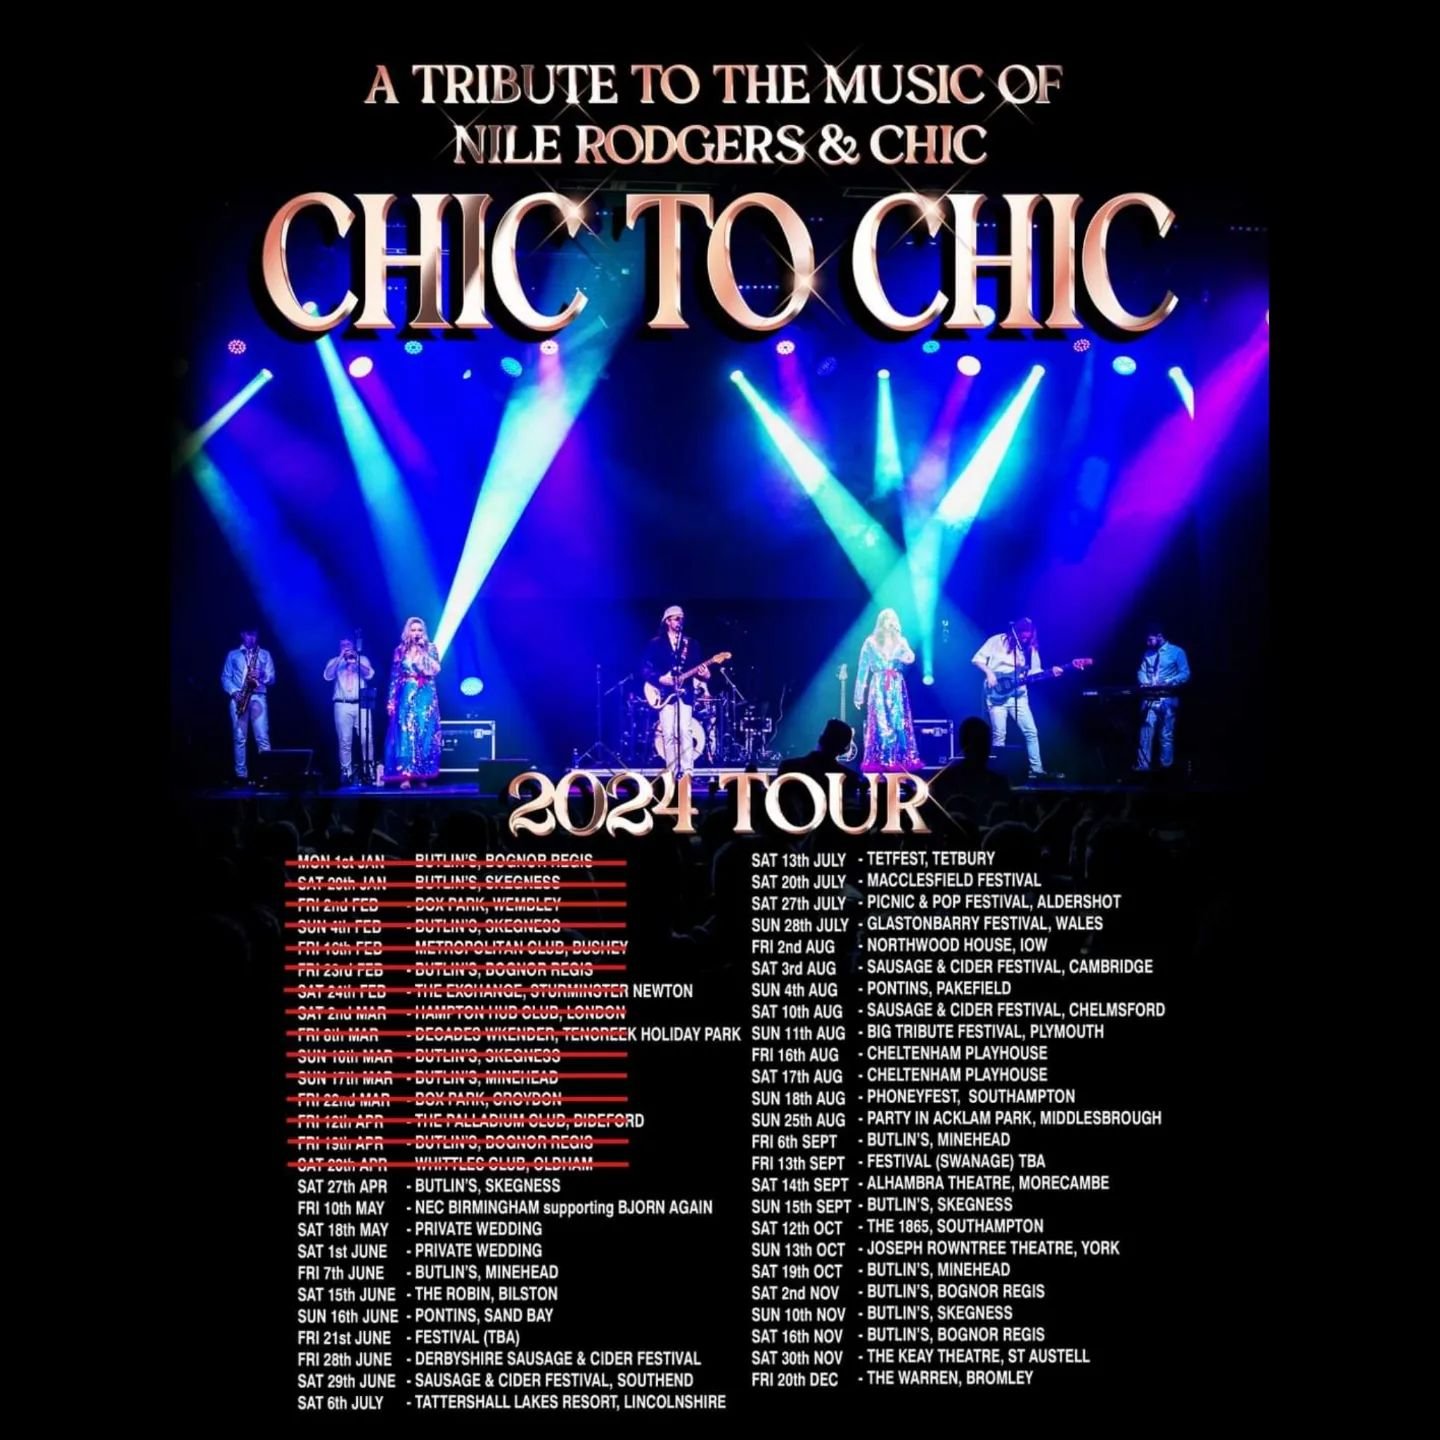 We've got lots going on this year, check out our tour poster, and keep updated on when/where you can catch us.

#nilerodgersandchictribute #chictributeband #chic #chictochic #nilerodgersandchictributeshow #chictributeshow #disco #nilerodgersandchic #